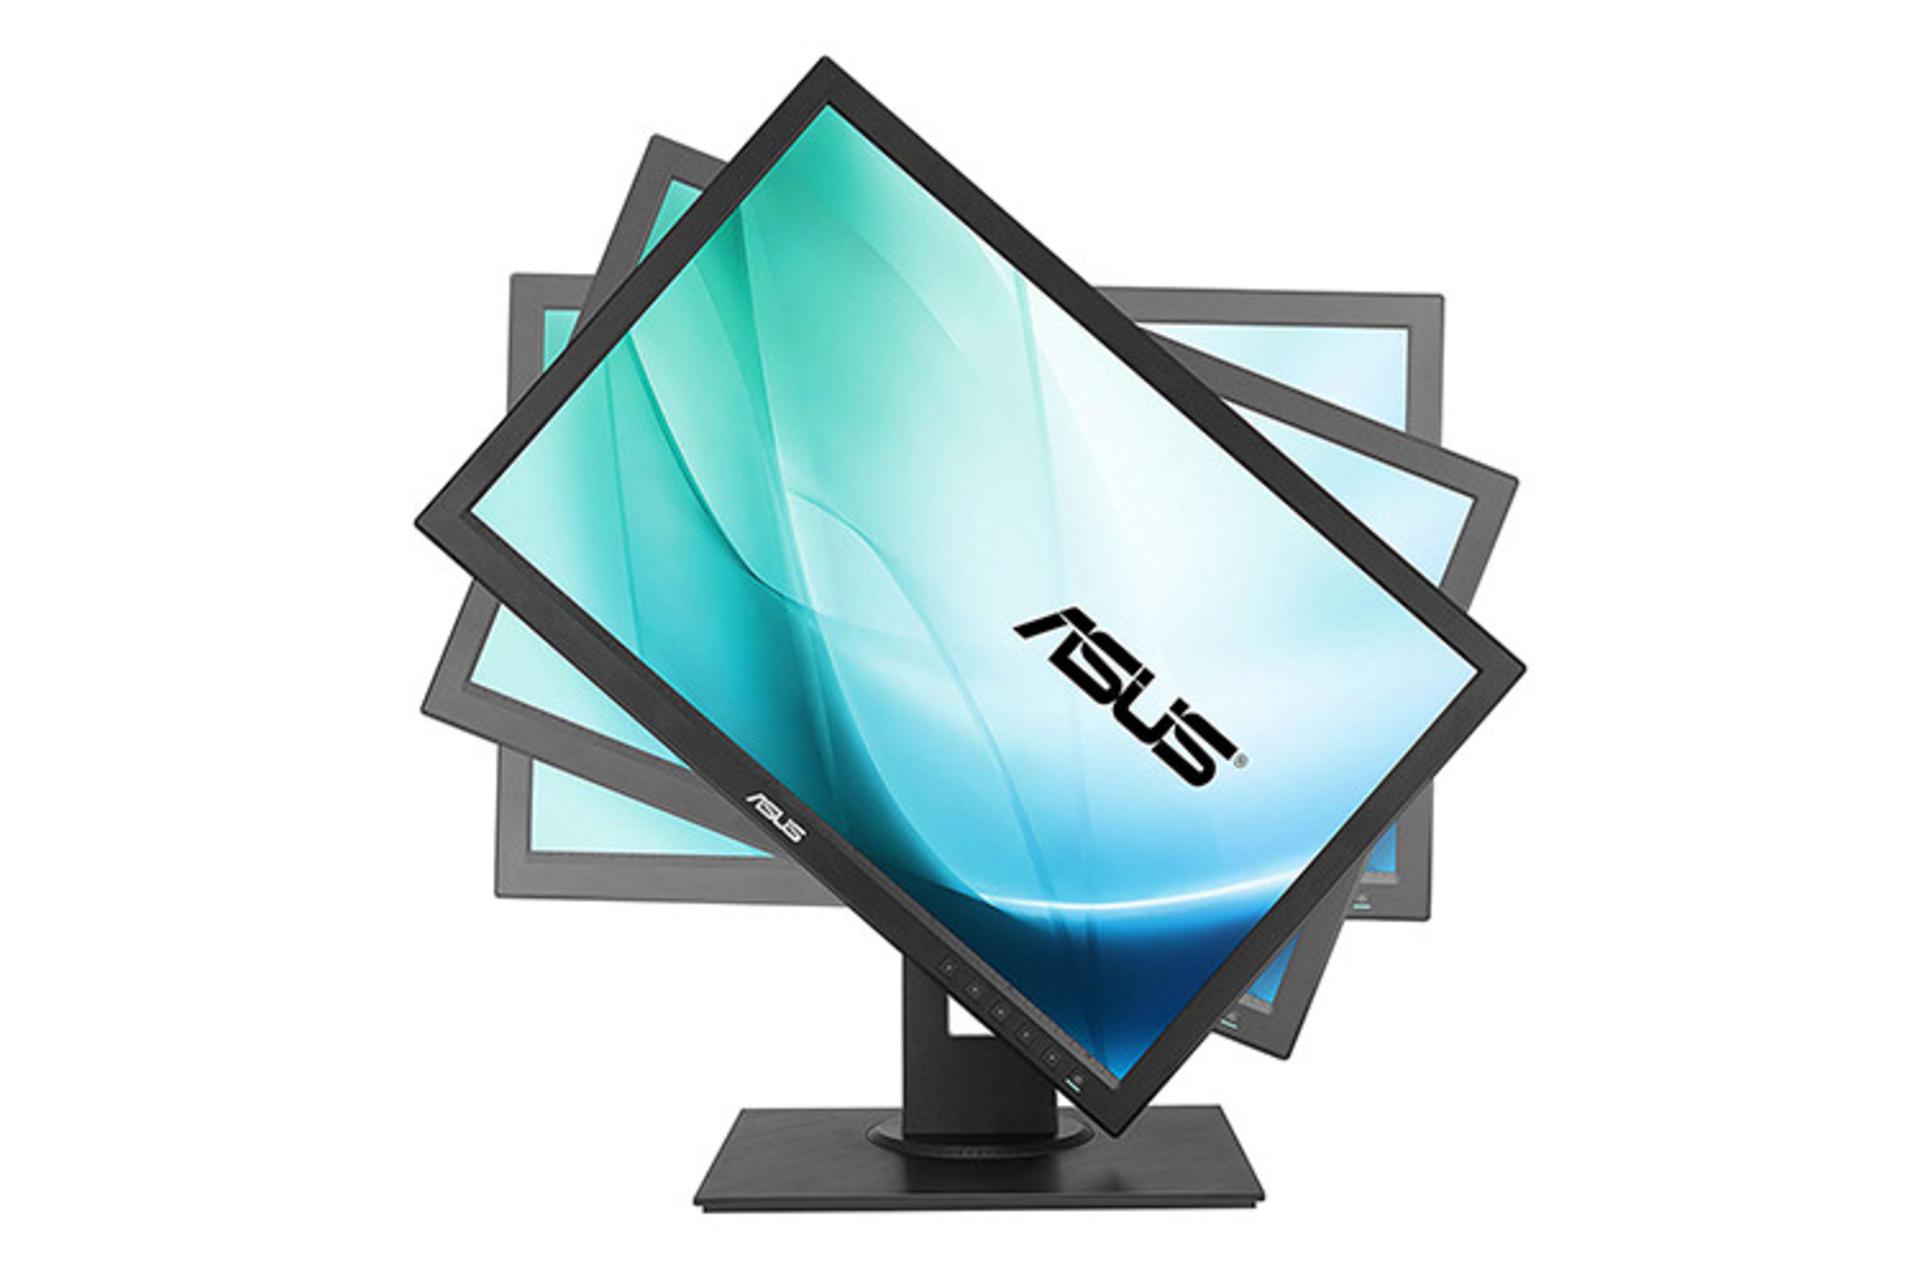 Asus BE209TLB